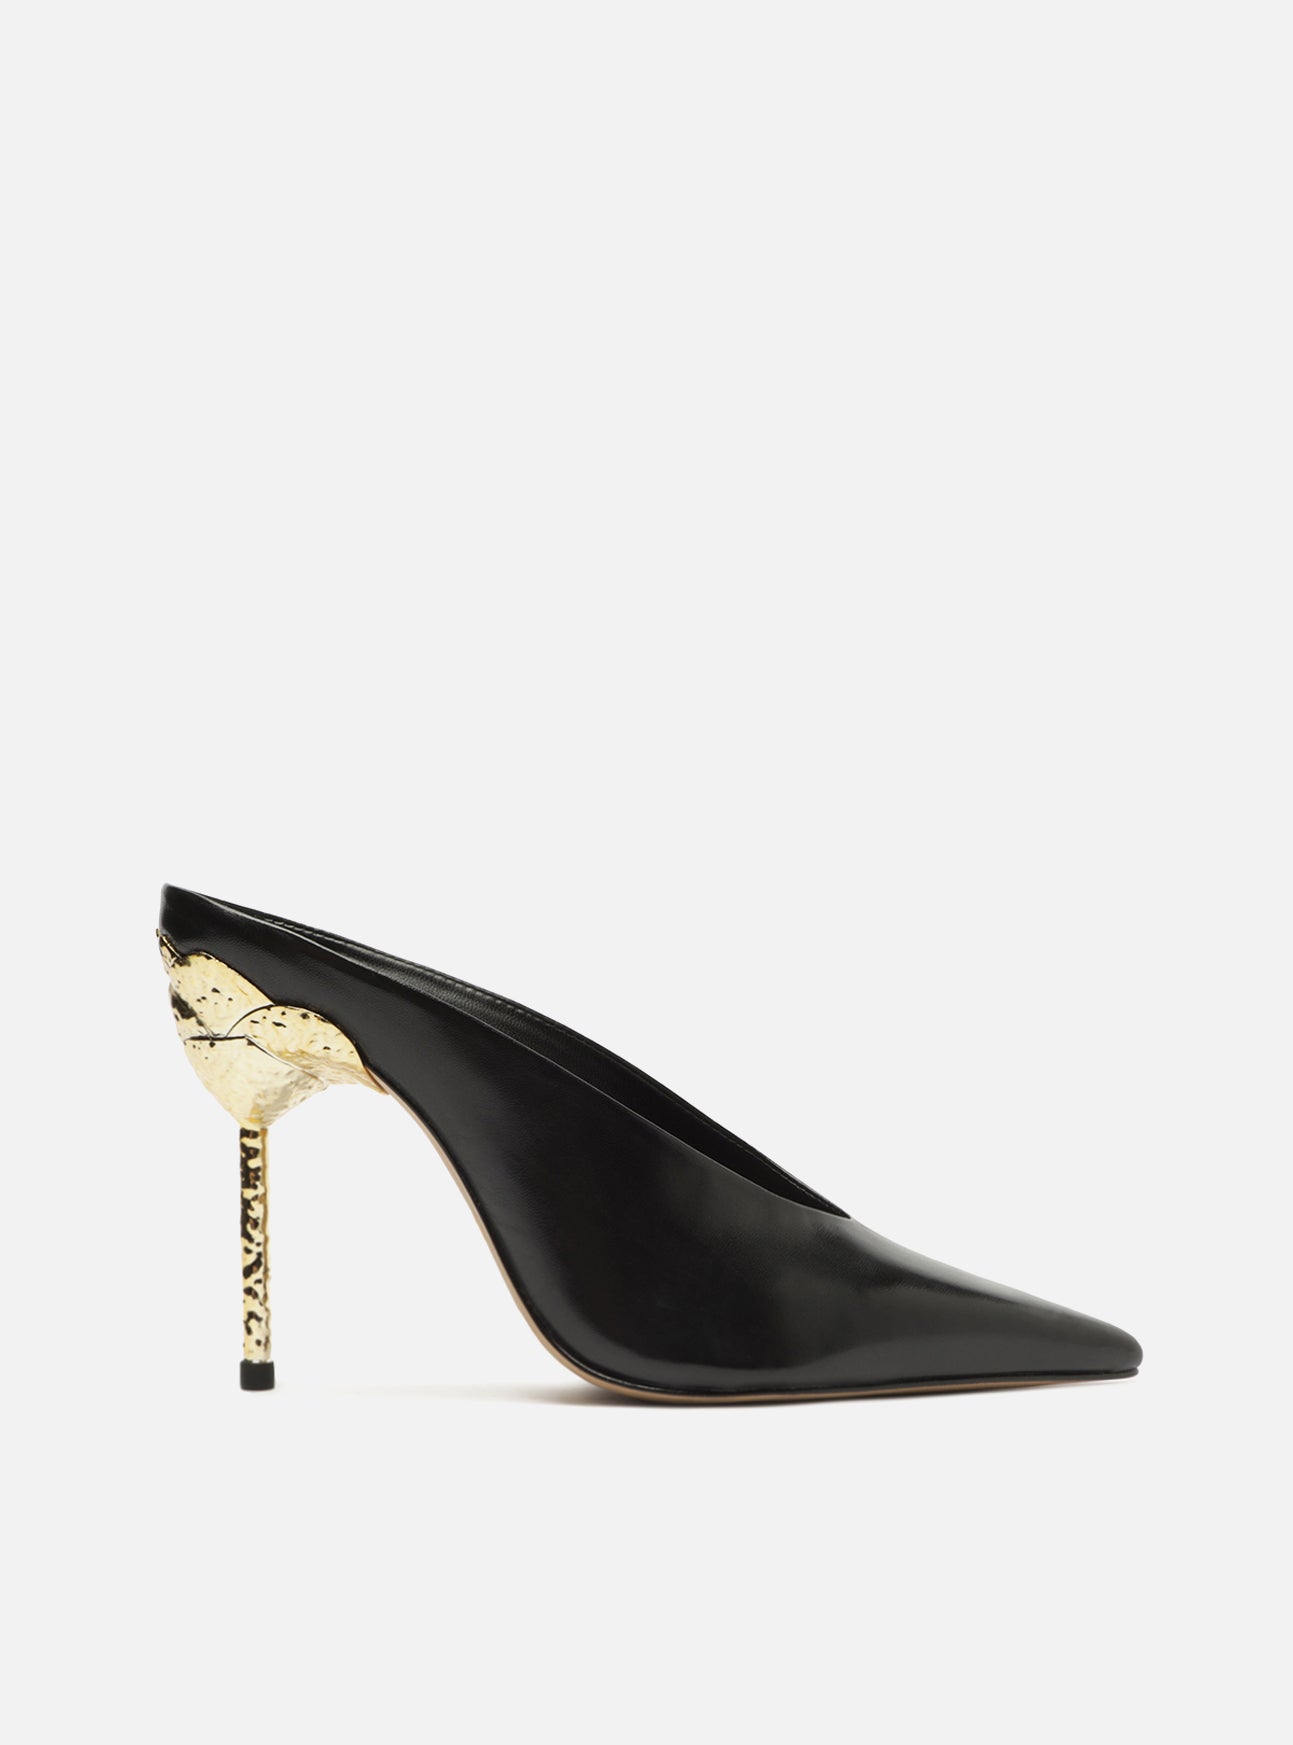 Black leather pump features a high stiletto heel in gold metal with a hammered effect and a pointed toe. With V-cut on the vamp.